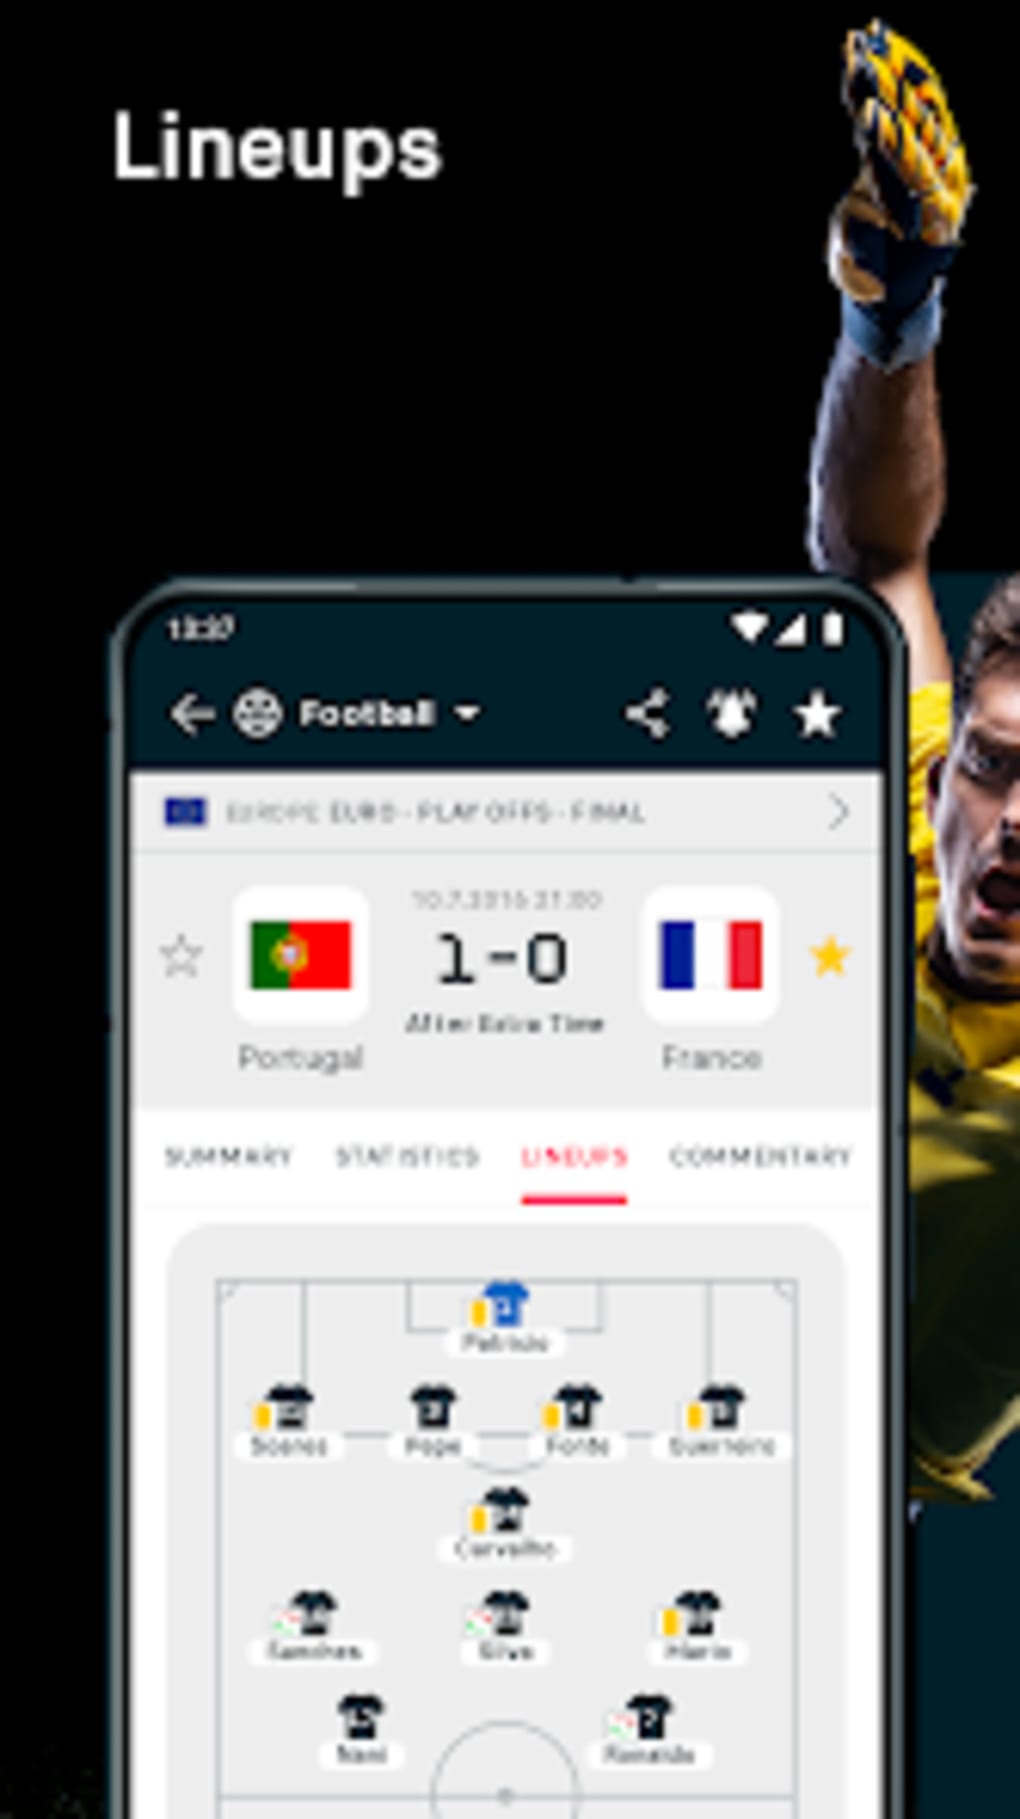 FlashScore APK for Android